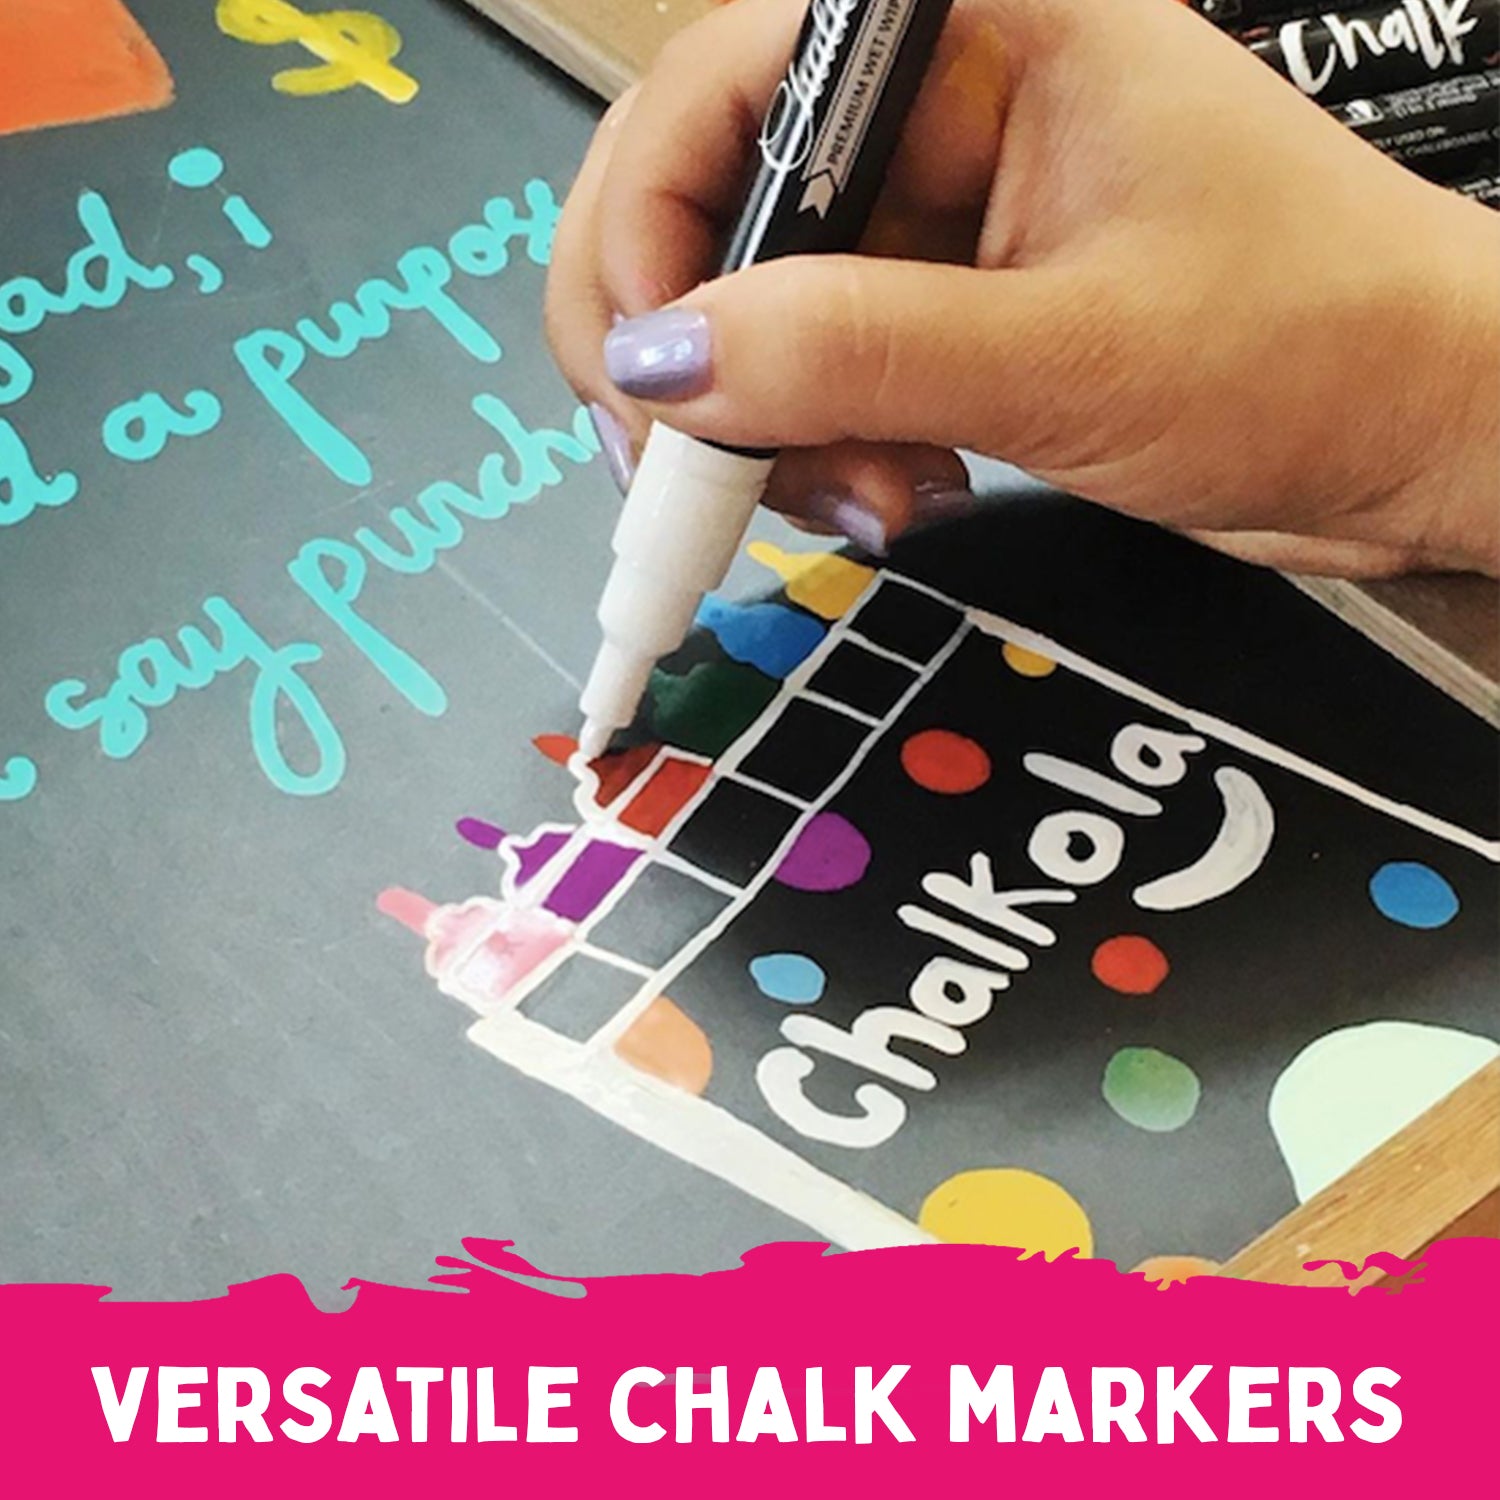 Chalkola Chalk Markers - review and reader discount